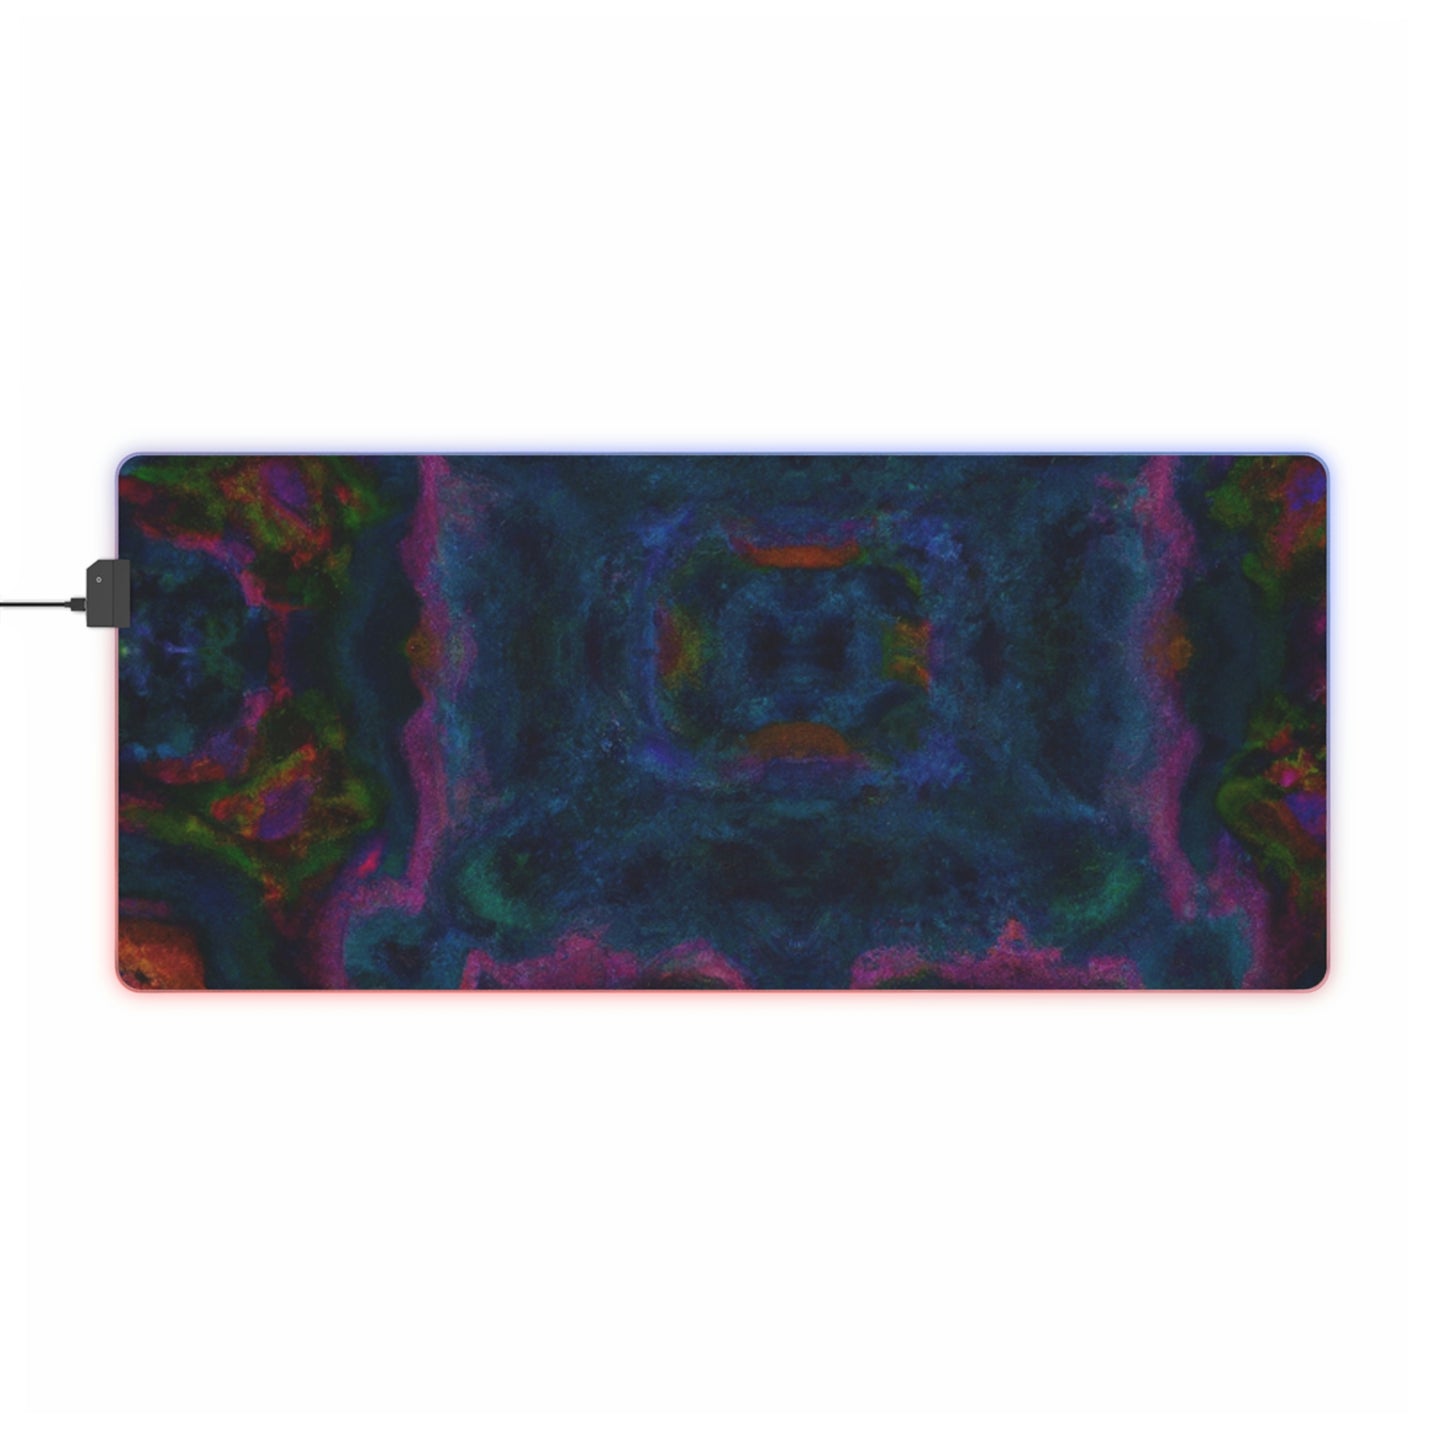 Robbie Rocketman - Psychedelic Trippy LED Light Up Gaming Mouse Pad